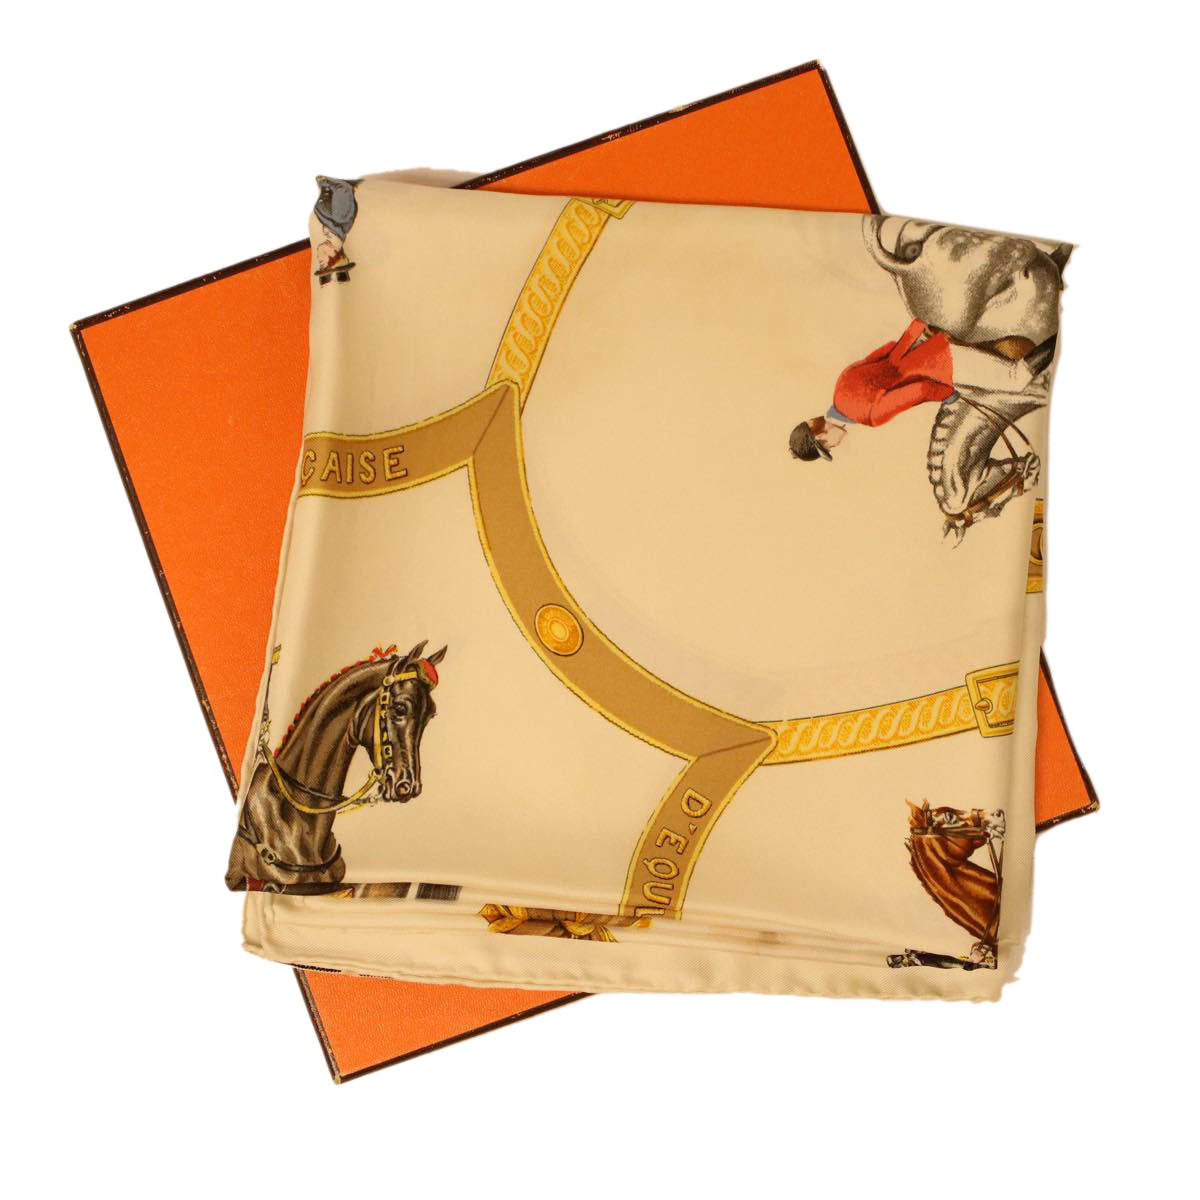 HERMES Carre 90 Le general L'Hotte Scarf Silk White Auth 42697